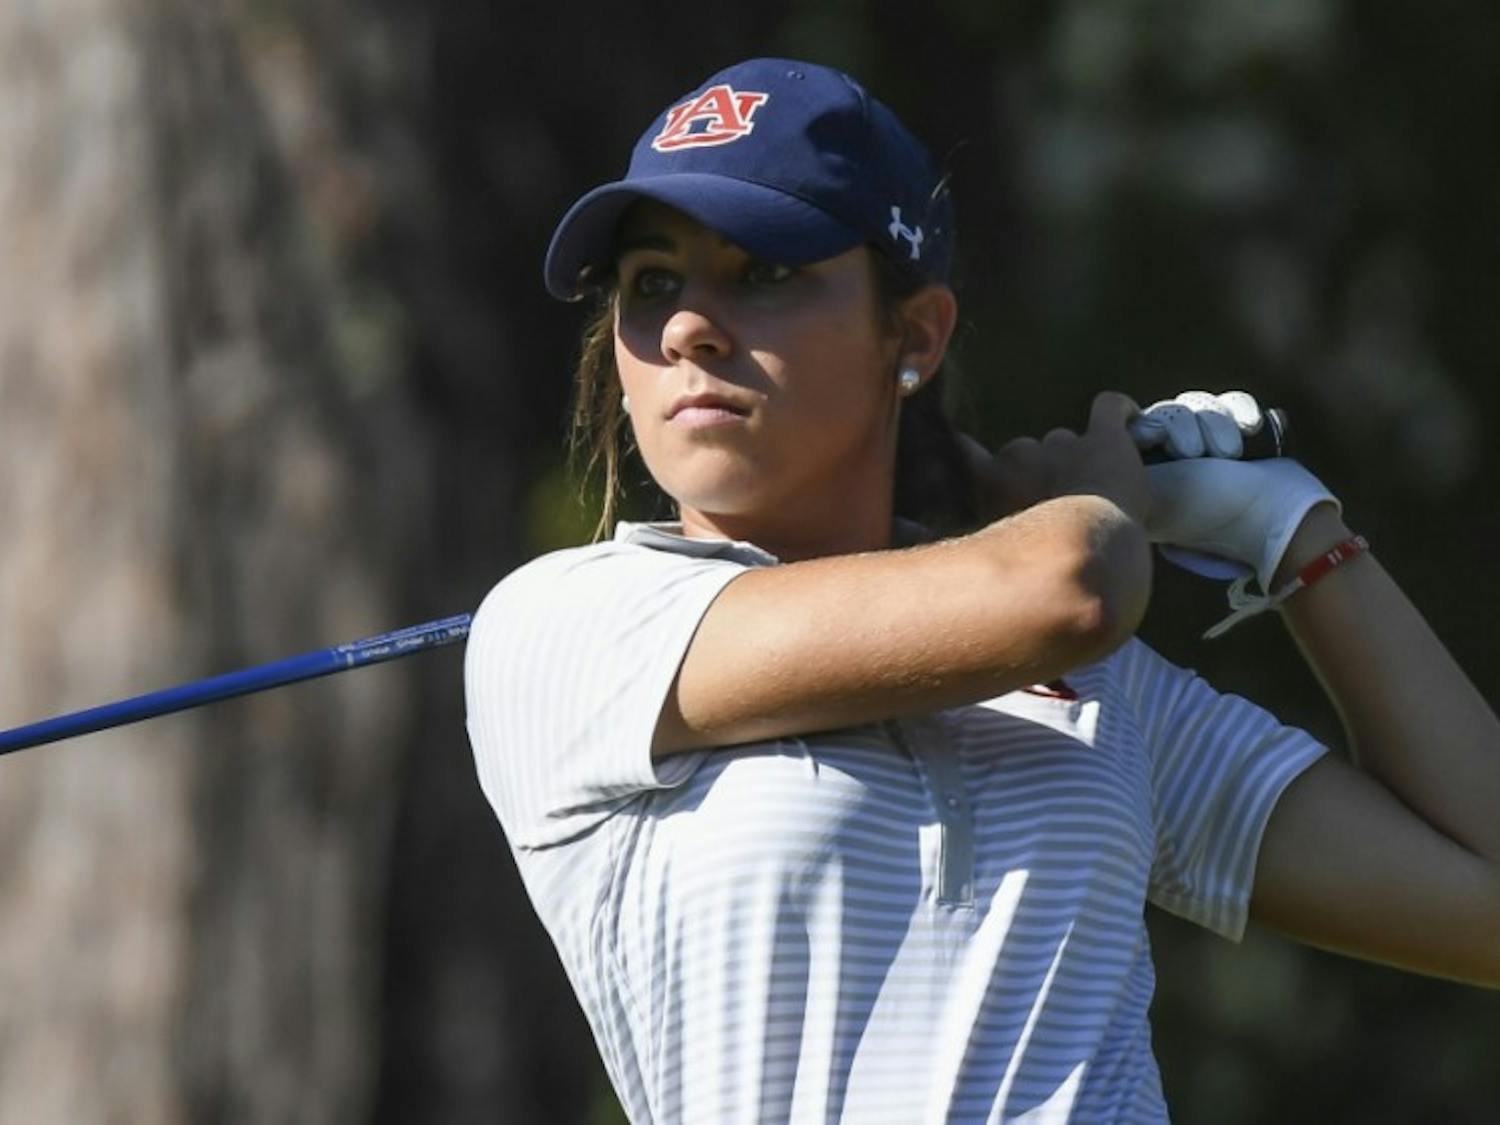 Elena Hualde recorded her third round in the 60s this season on Tuesday.